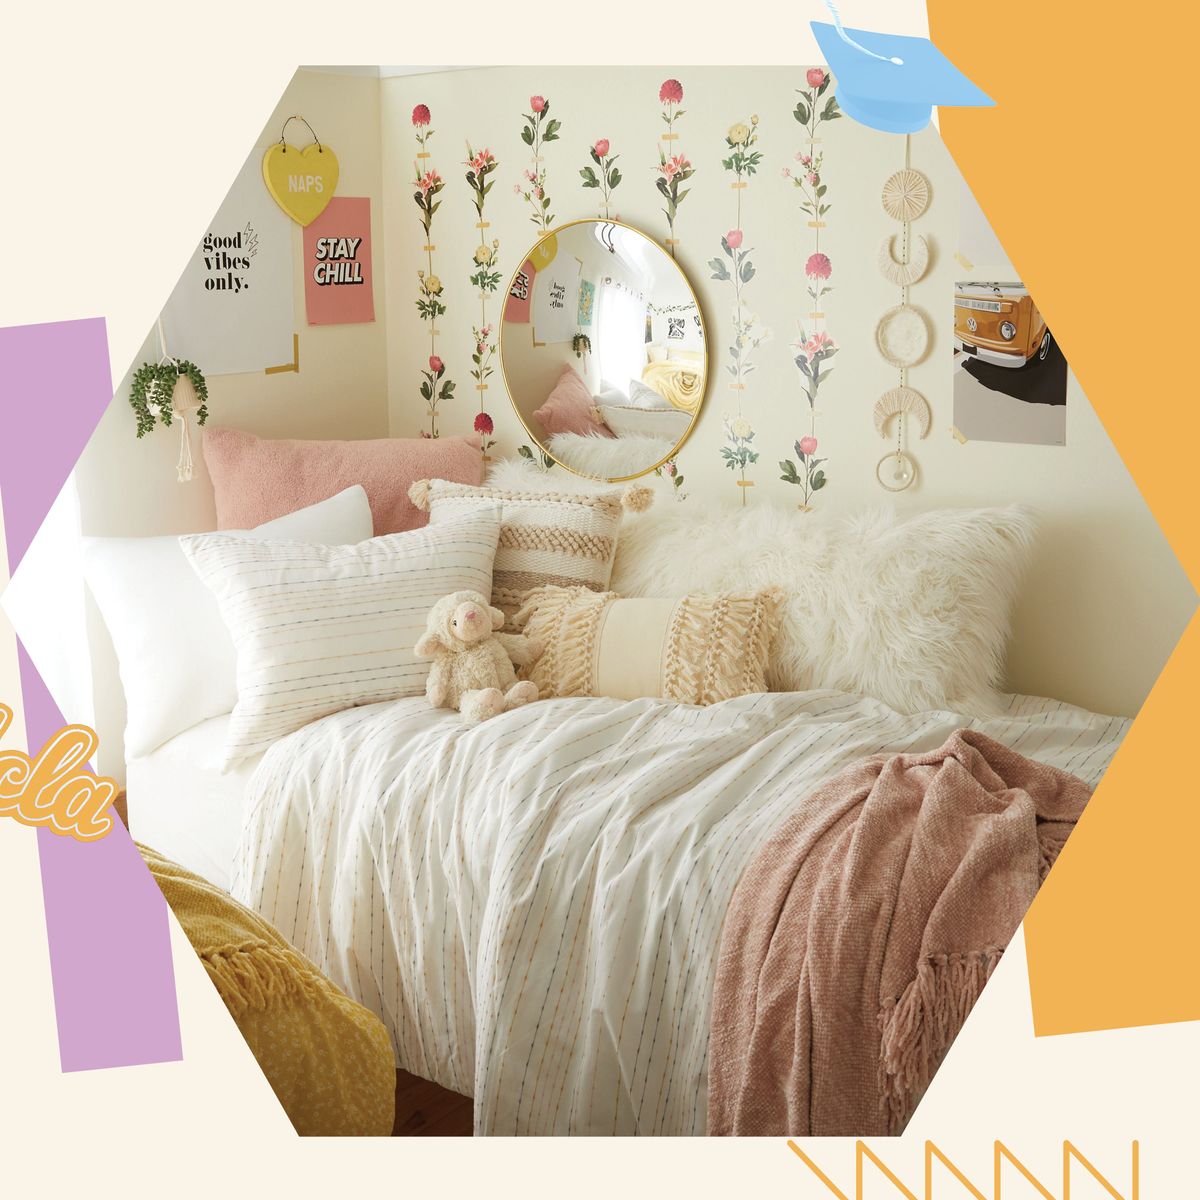 the sorority house room, flower wall, white and pink bed linen